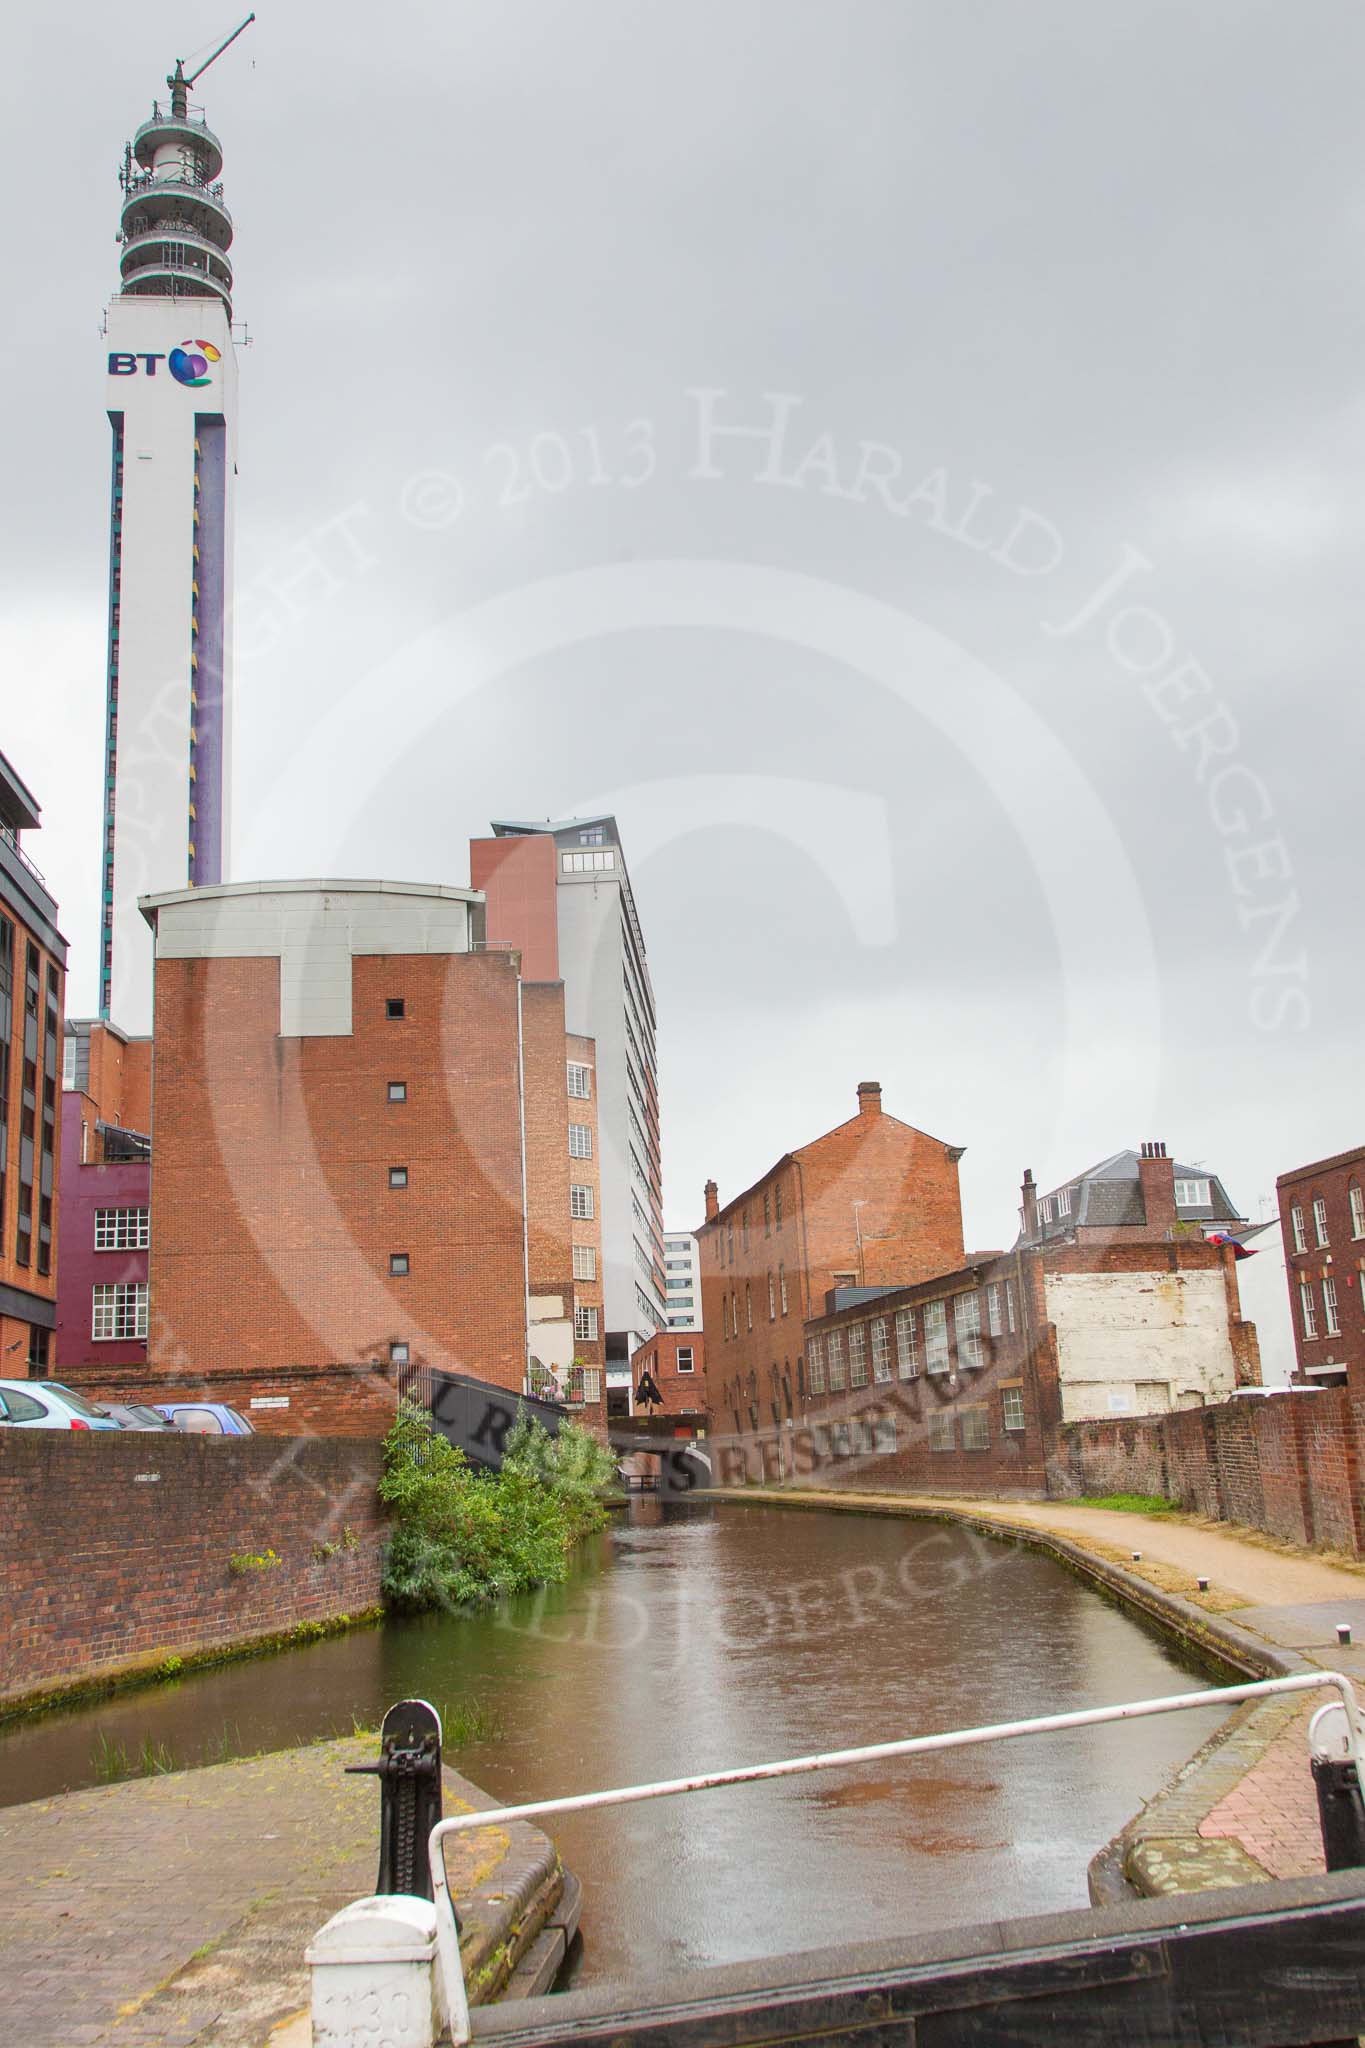 BCN Marathon Challenge 2014: The Birmingham & Fazeley Canal between  Ludgate Hill Brudge and Livery Street Bridge, with old canalside architecture on the right, and modern developments on the right..
Birmingham Canal Navigation,


United Kingdom,
on 23 May 2014 at 15:01, image #36